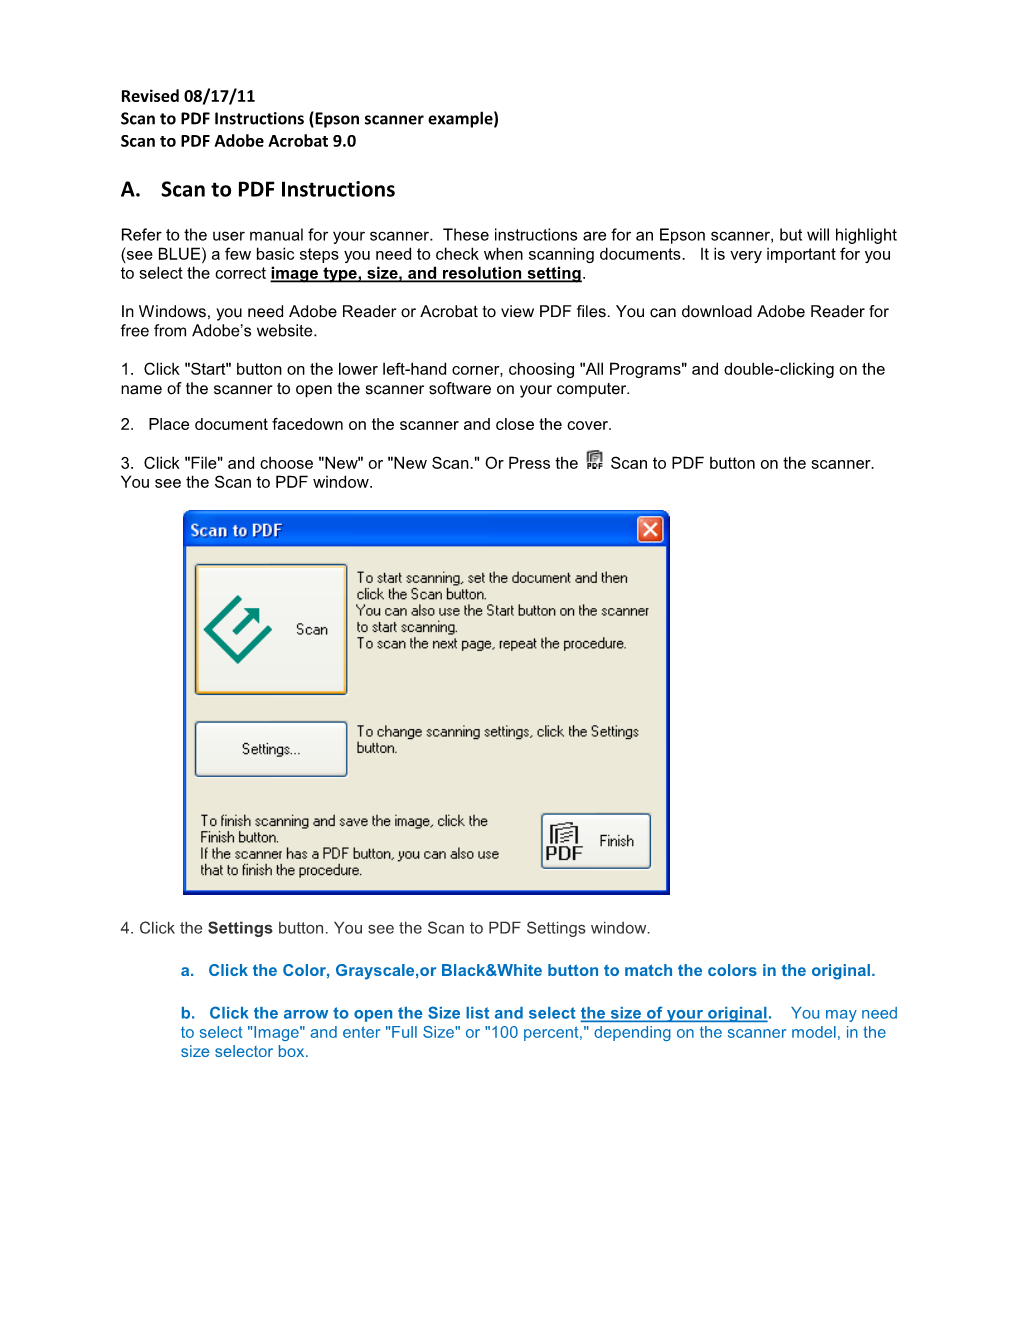 A. Scan to PDF Instructions